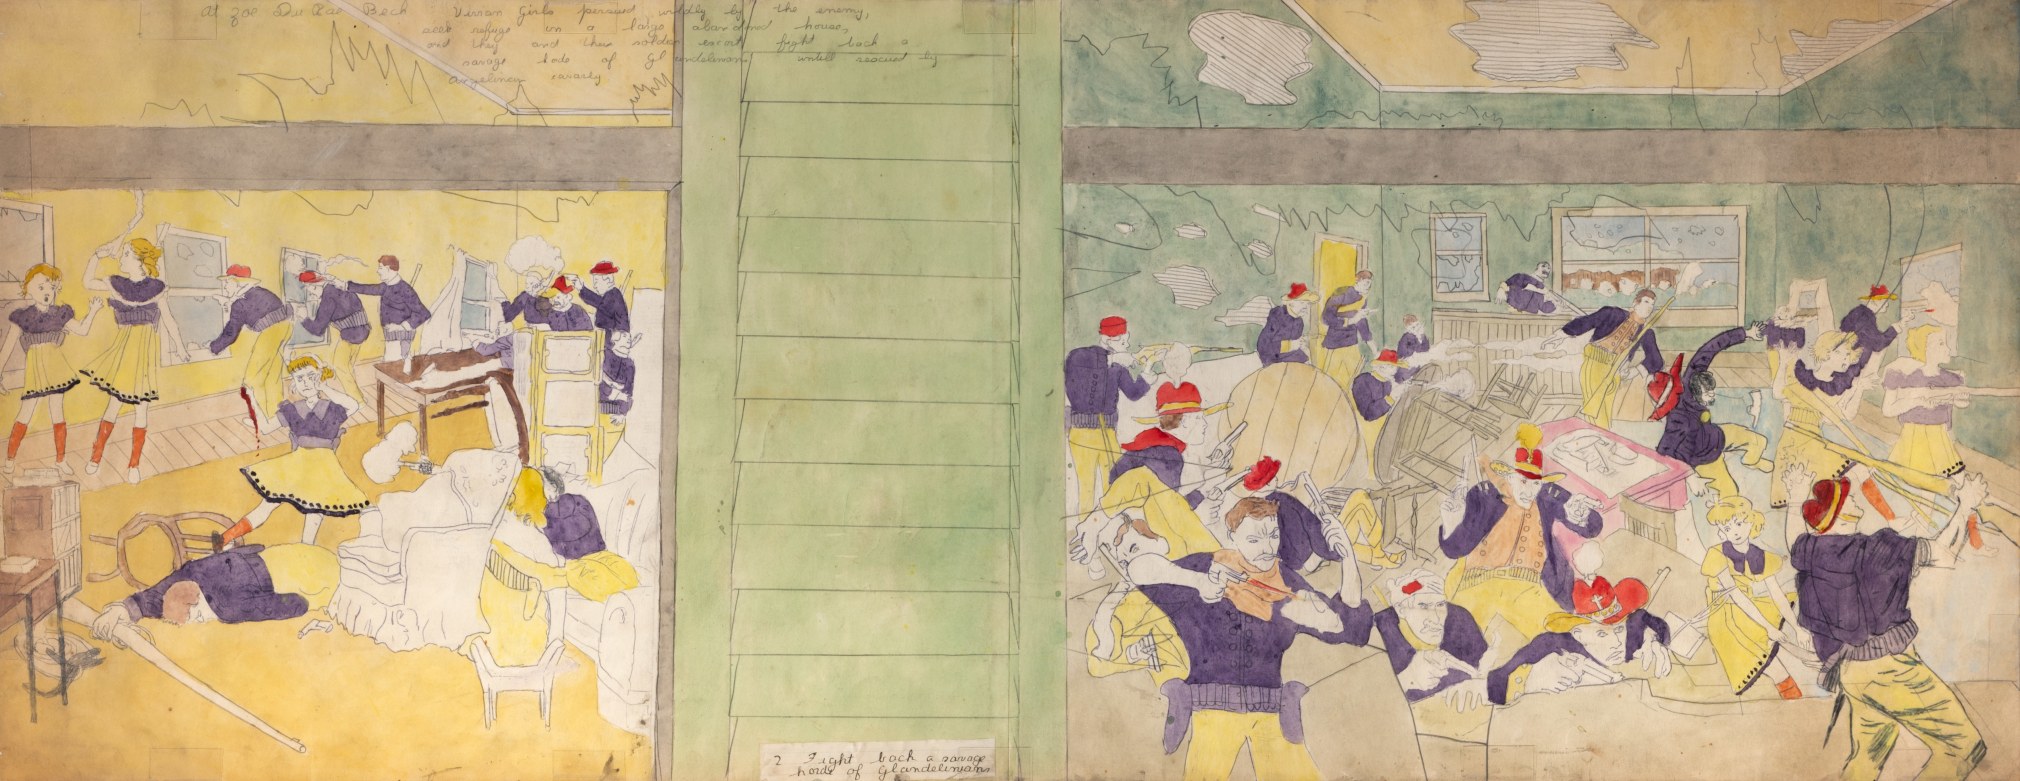 Henry Darger - Artists - Andrew Edlin Gallery